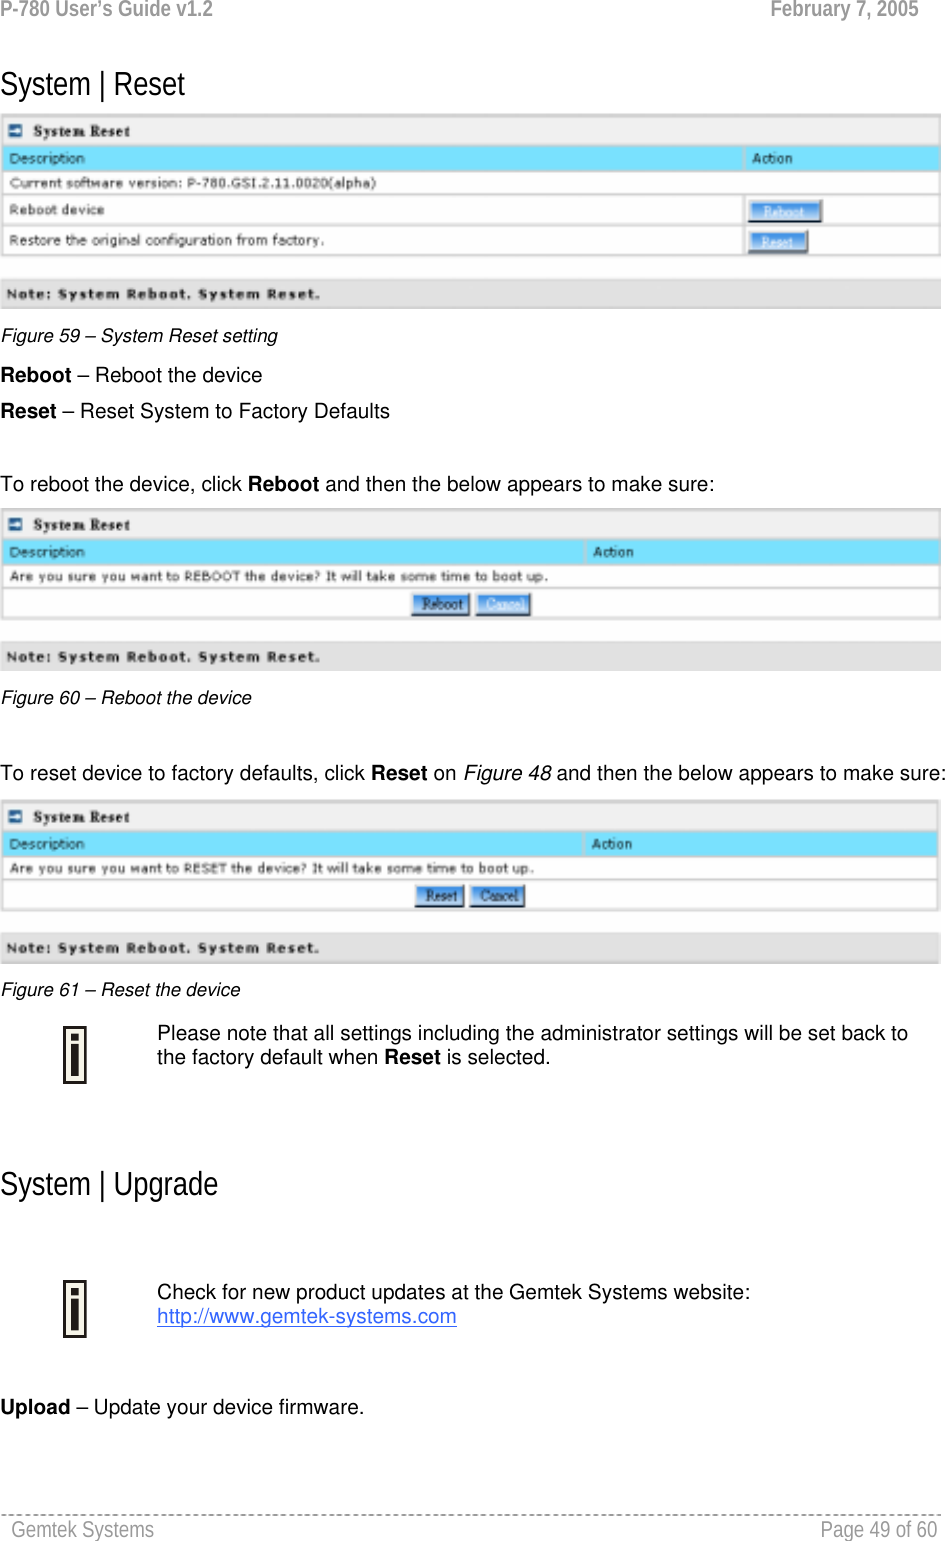 P-780 User’s Guide v1.2  February 7, 2005 Gemtek Systems    Page 49 of 60   System | Reset  Figure 59 – System Reset setting Reboot – Reboot the device Reset – Reset System to Factory Defaults  To reboot the device, click Reboot and then the below appears to make sure:  Figure 60 – Reboot the device  To reset device to factory defaults, click Reset on Figure 48 and then the below appears to make sure:  Figure 61 – Reset the device  Please note that all settings including the administrator settings will be set back to the factory default when Reset is selected.  System | Upgrade   Check for new product updates at the Gemtek Systems website: http://www.gemtek-systems.com  Upload – Update your device firmware. 